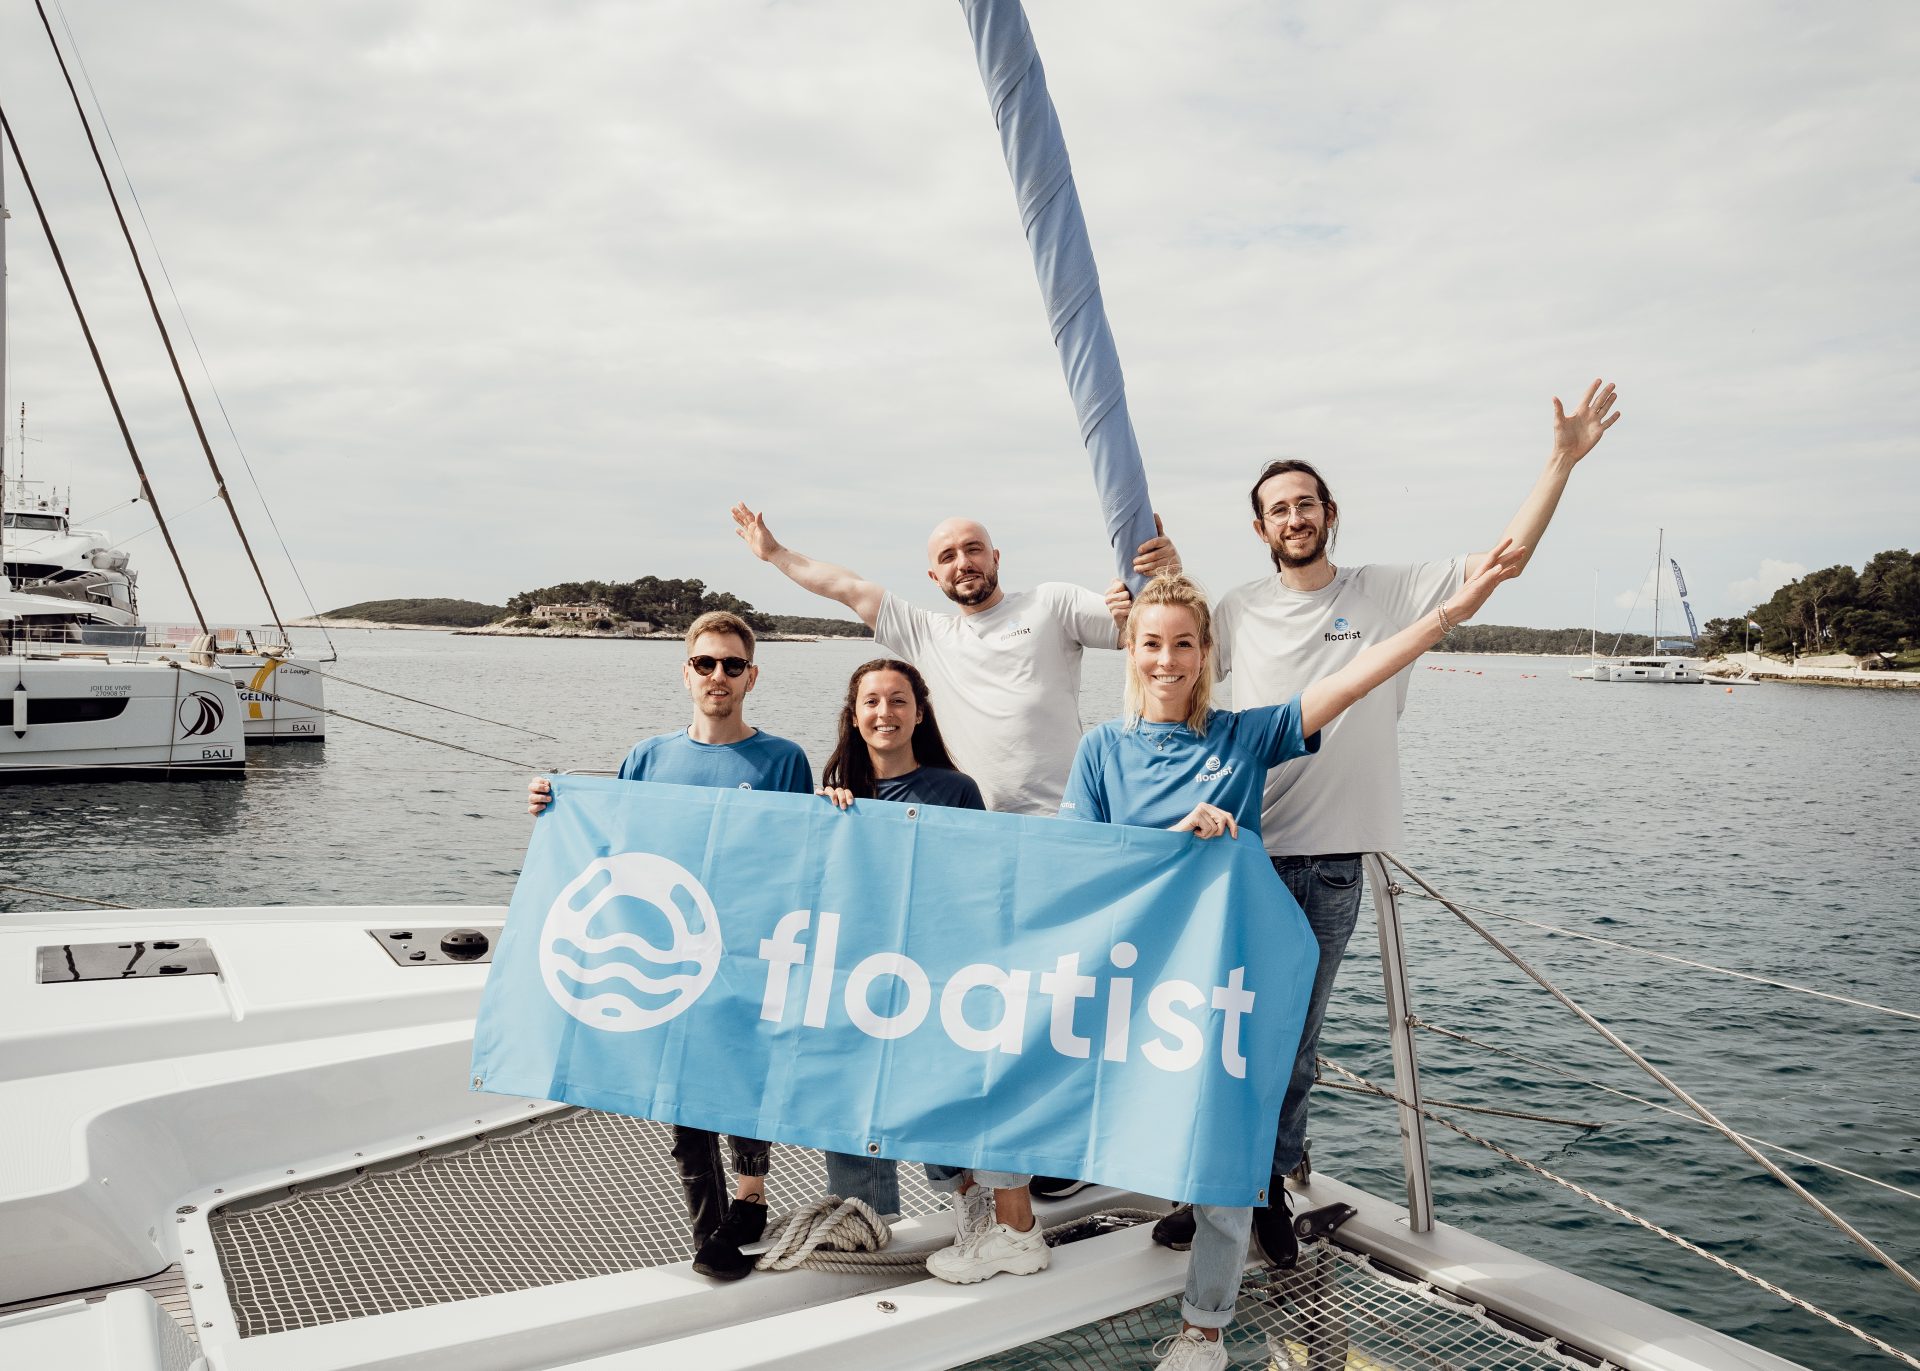 A team building experience for the Floatist team